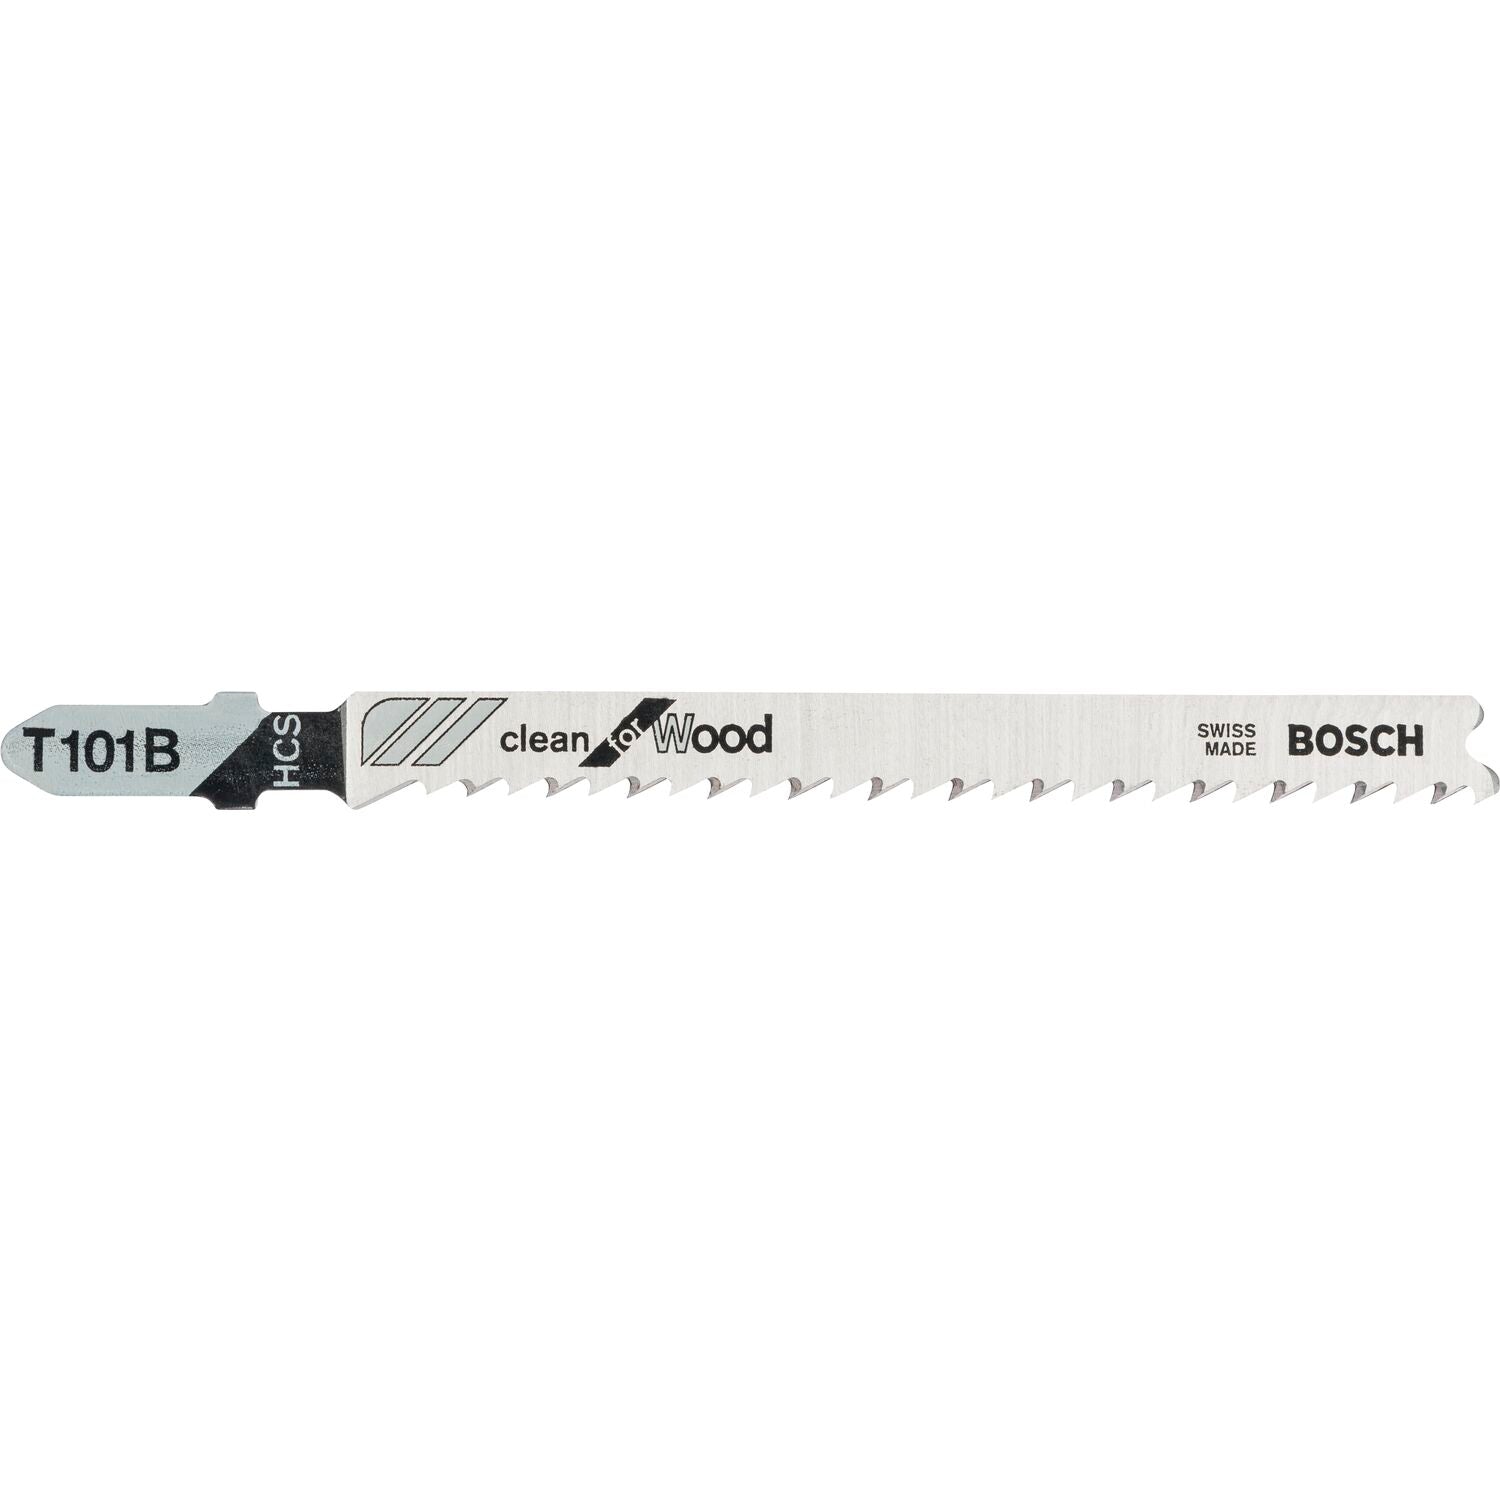 Bosch Jigsaw Blades HCS T 101 B Clean for Wood, 100 Pack 2608637876 Power Tool Services